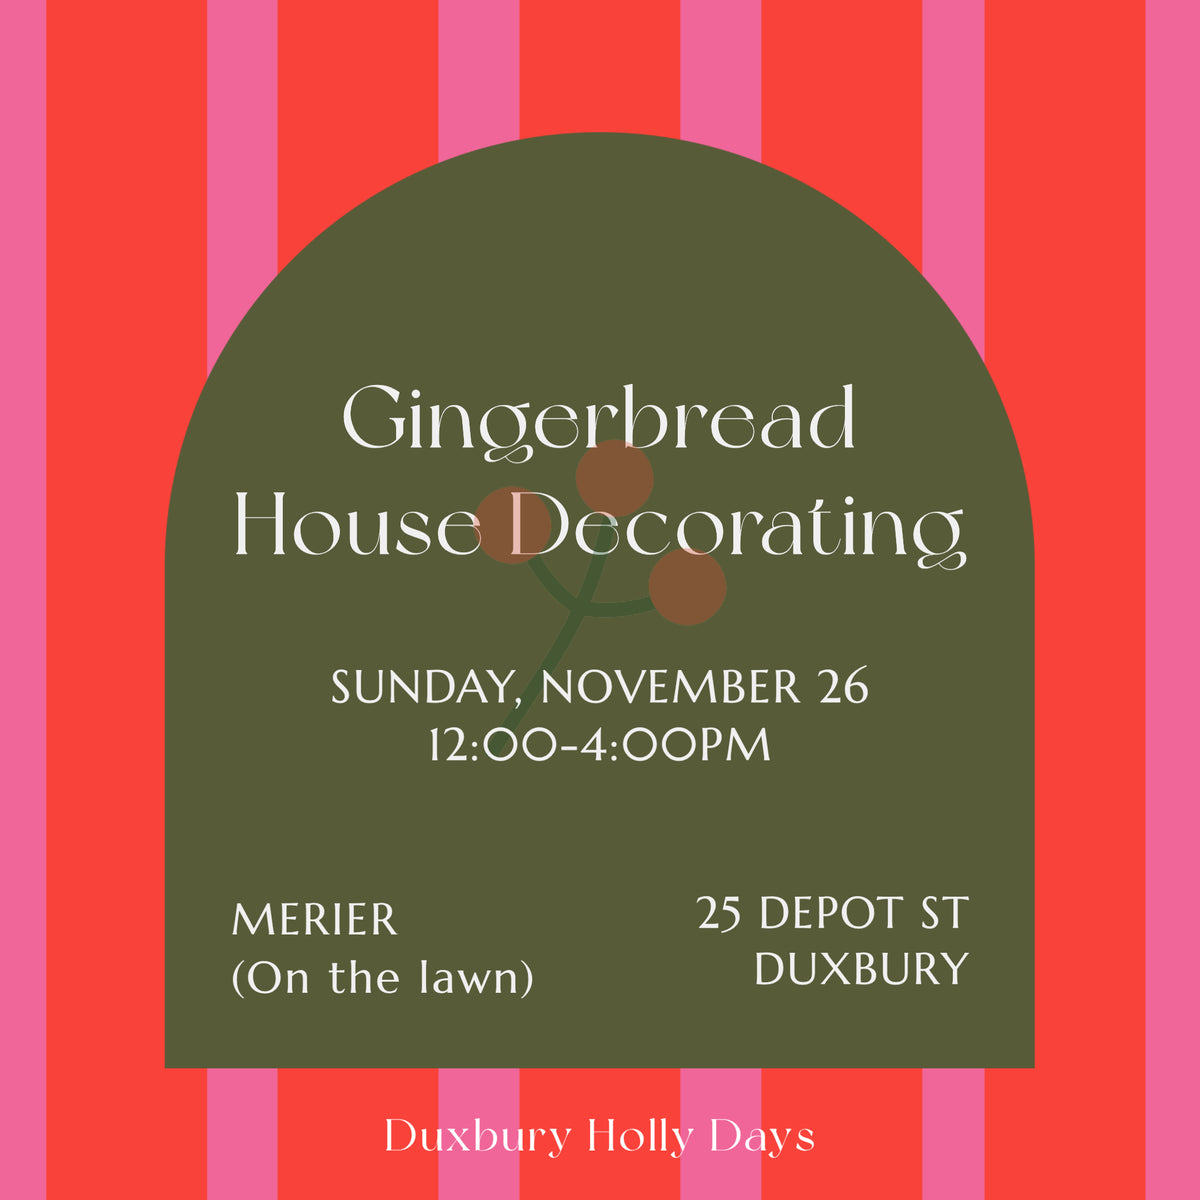 Gingerbread House Decorating for Duxbury Holly Days Merier